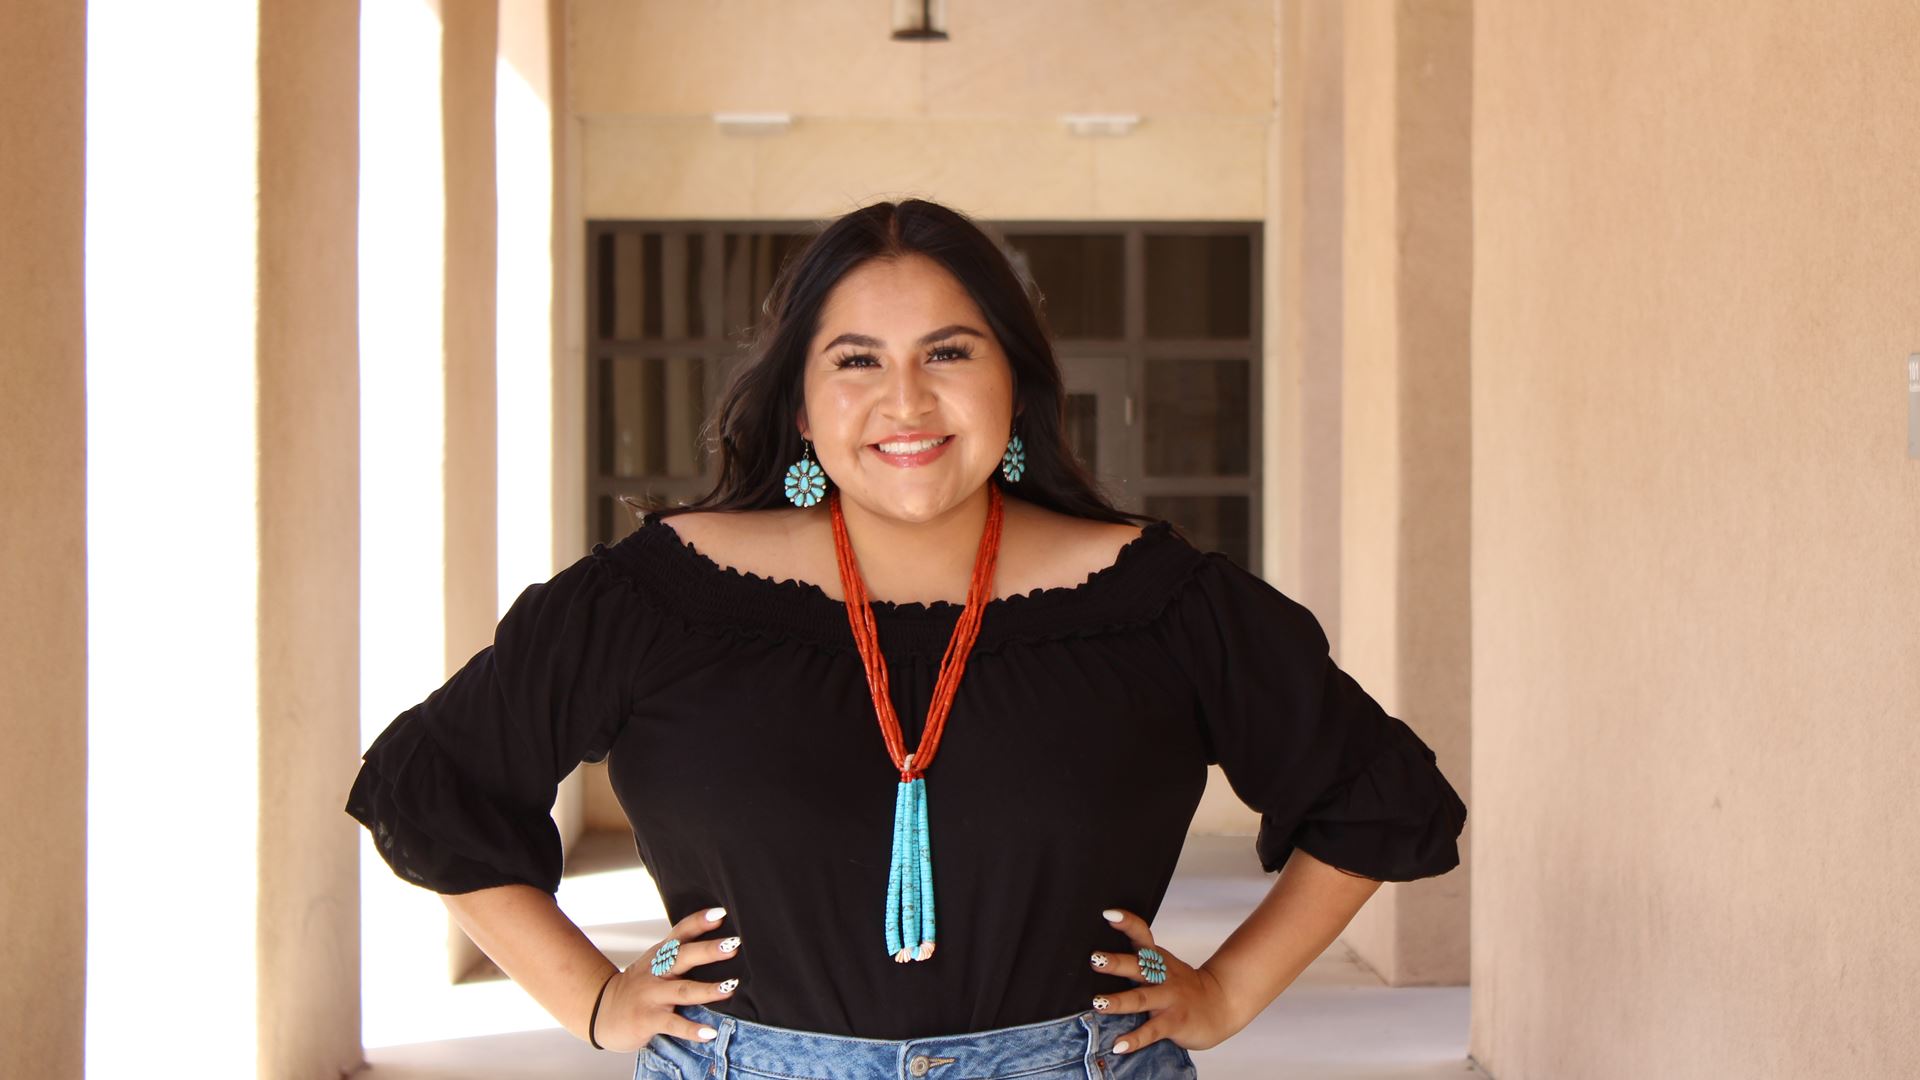 Recent NMSU graduate to represent NM, Navajo Nation at national conference